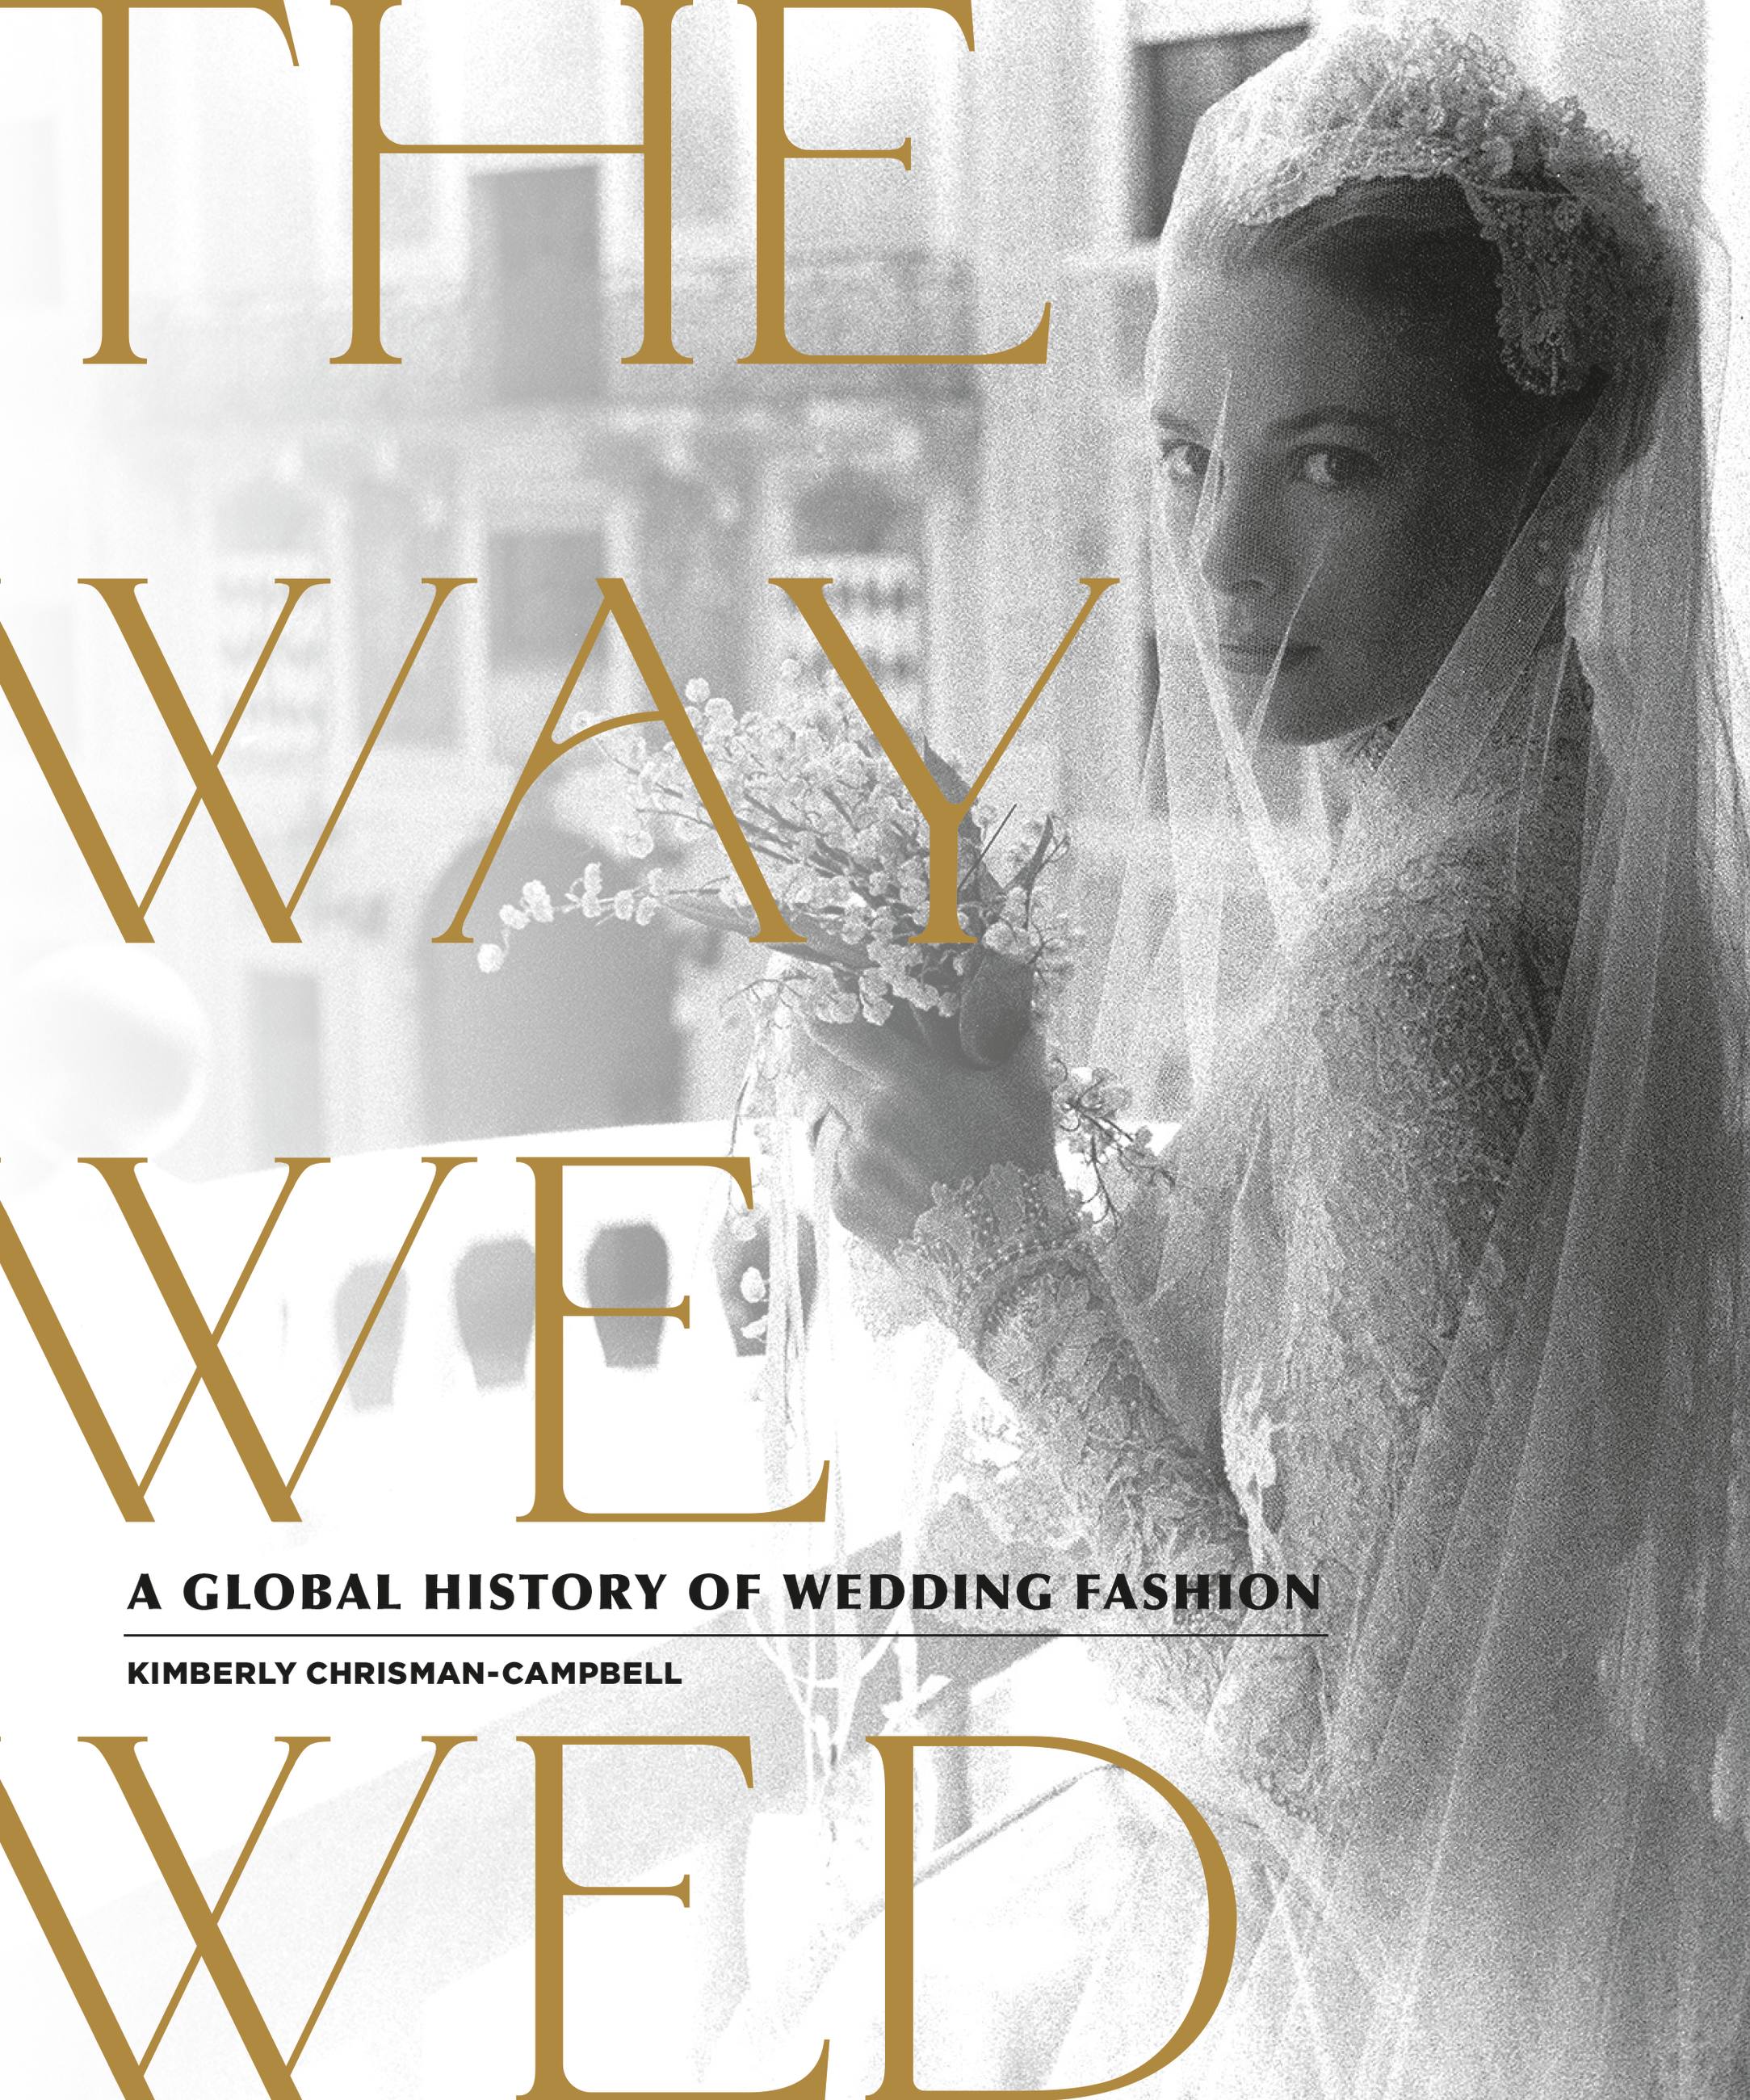 The Way We Wed by Kimberly Chrisman-Campbell Hachette Book Group